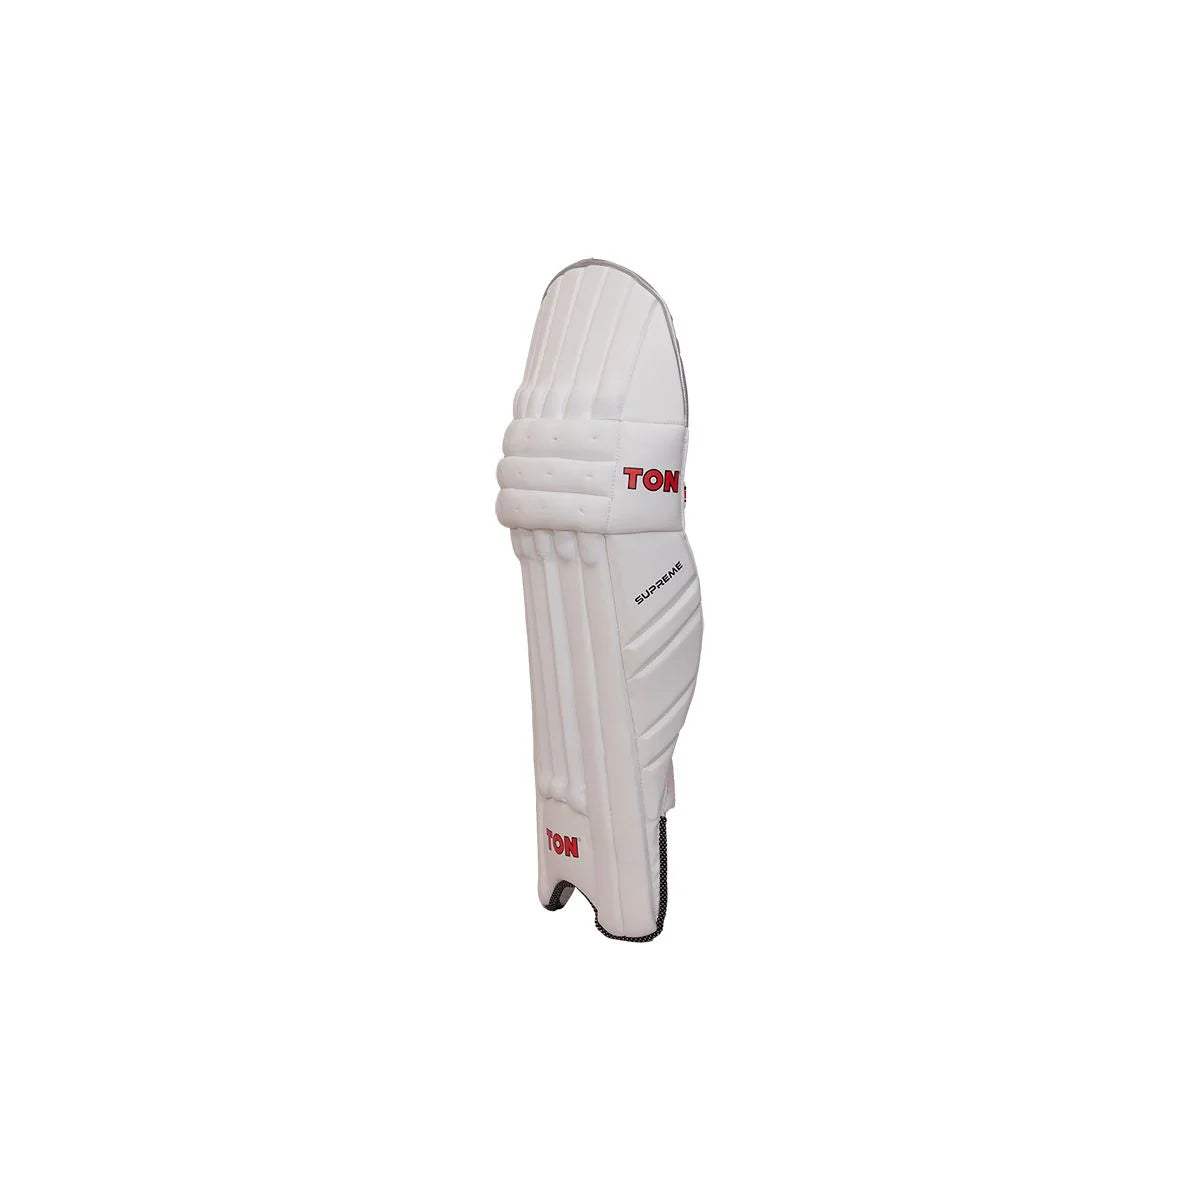 SS Ton Supreme Light Weight Cricket Batting Pads Pack of 2